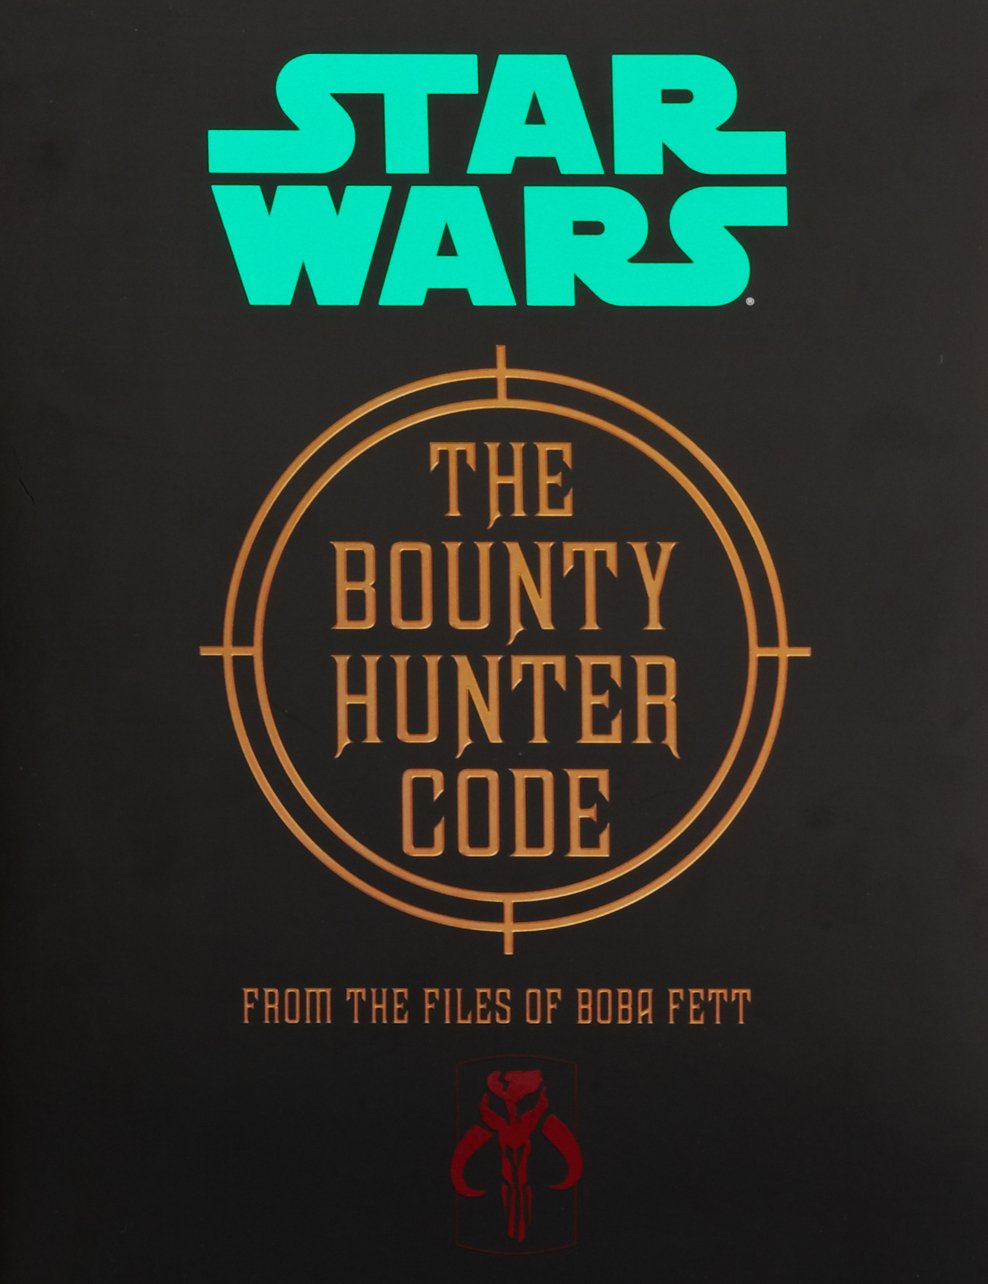 Premium-Eras-legendsPremium-Era-real in: Real-world articles, Articles with an excess of redlinks, Pages with missing permanent archival links, Guidebooks The Bounty Hunter Code: From the Files of Boba Fett